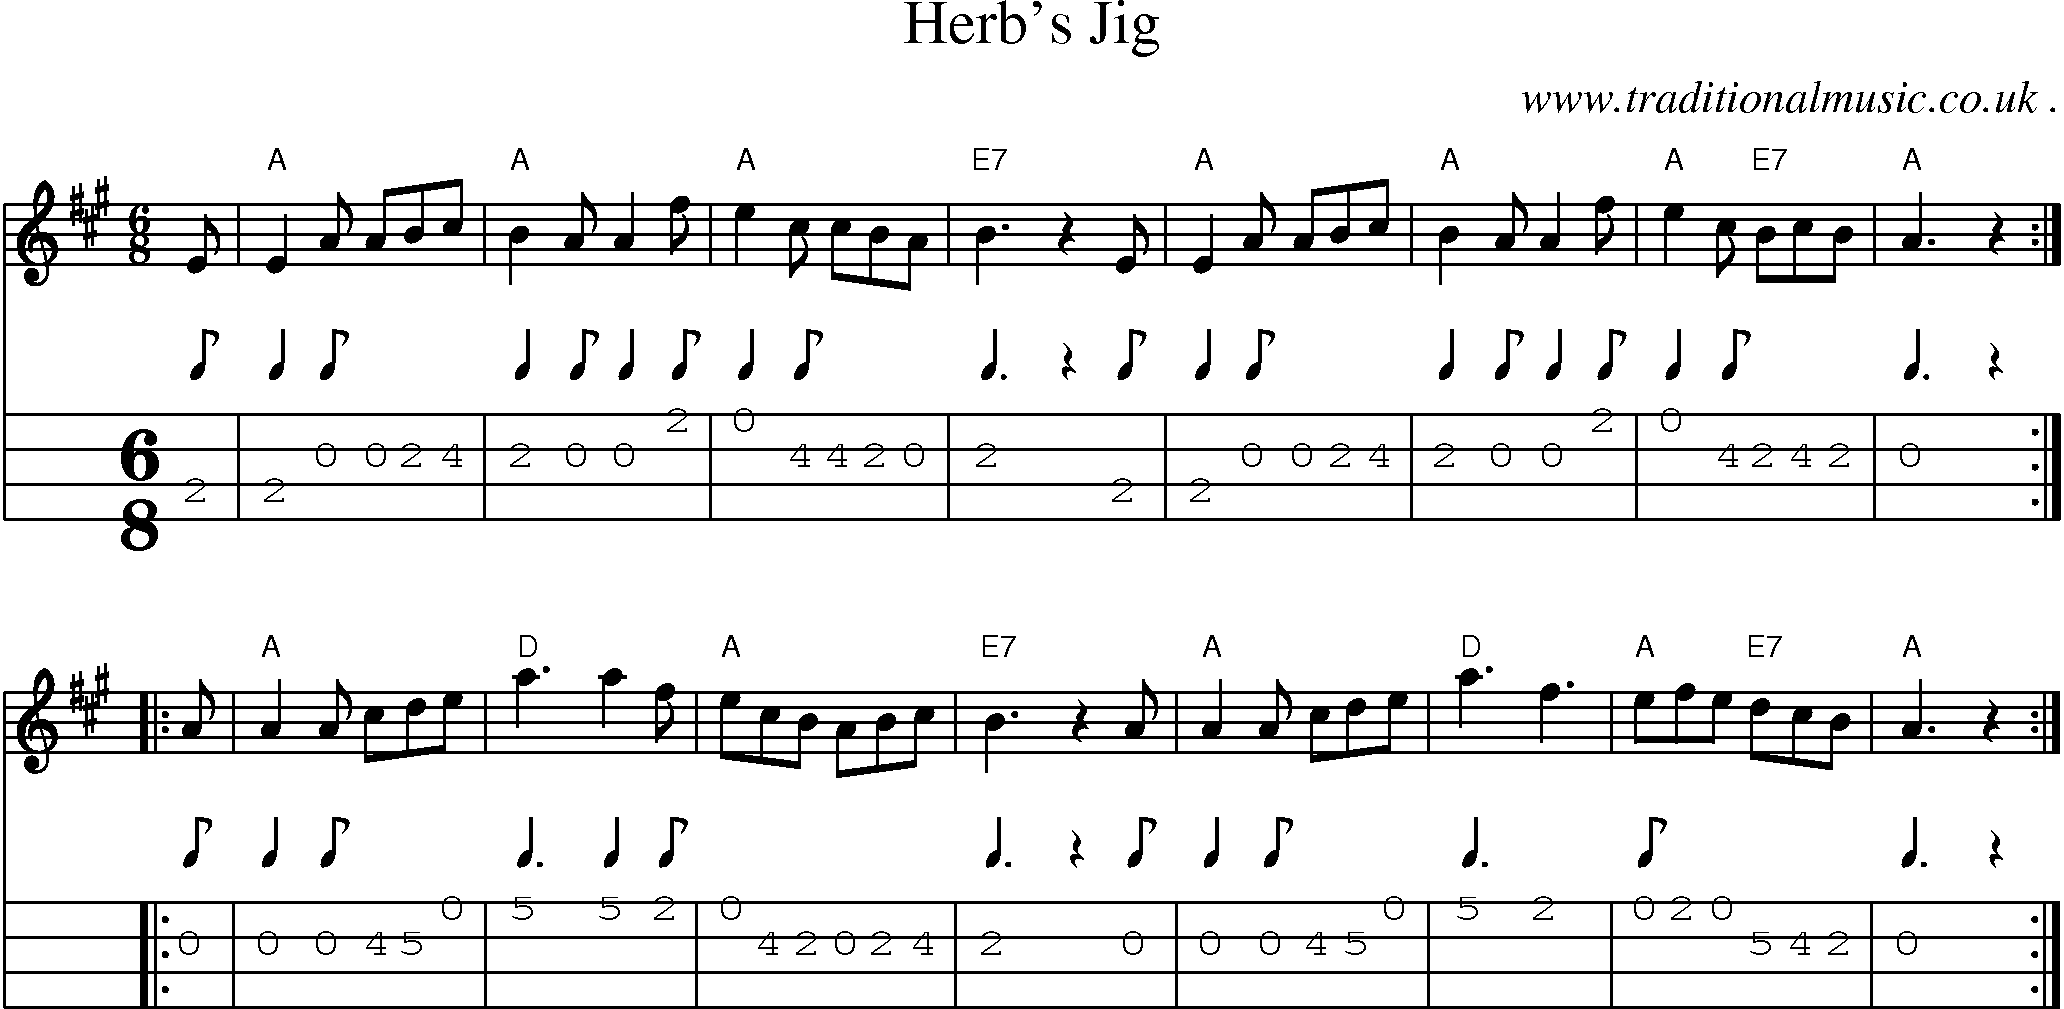 Sheet-music  score, Chords and Mandolin Tabs for Herbs Jig